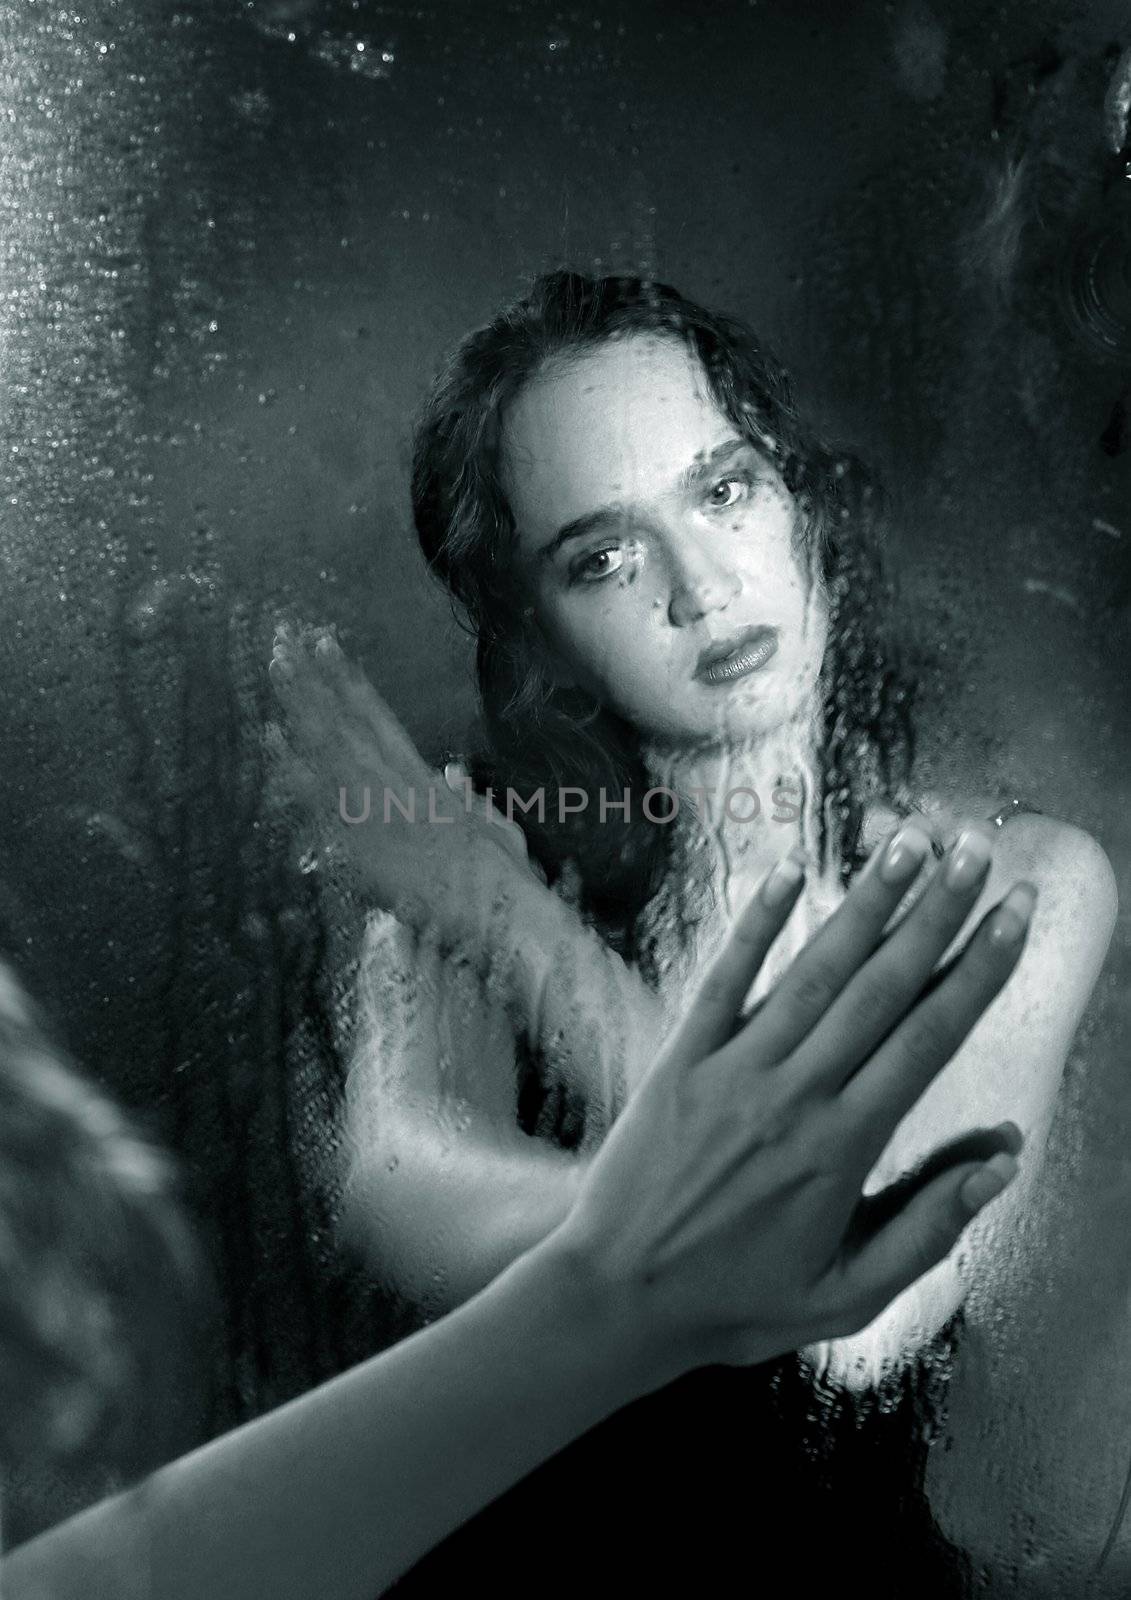 Portrait of the woman in reflection of a wet mirror